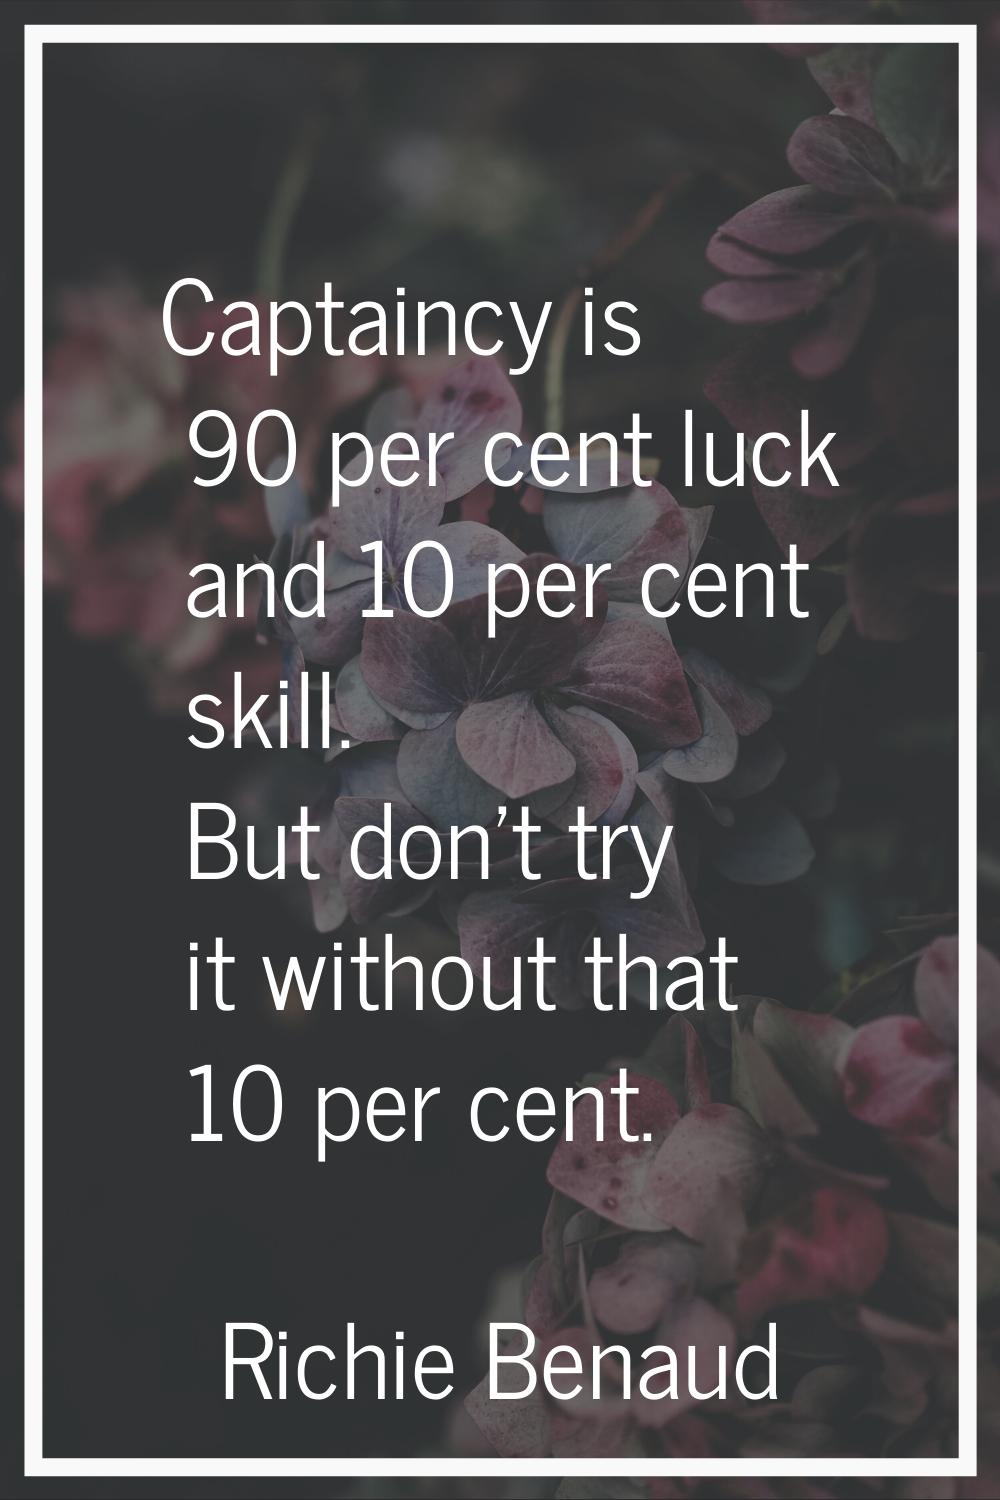 Captaincy is 90 per cent luck and 10 per cent skill. But don't try it without that 10 per cent.